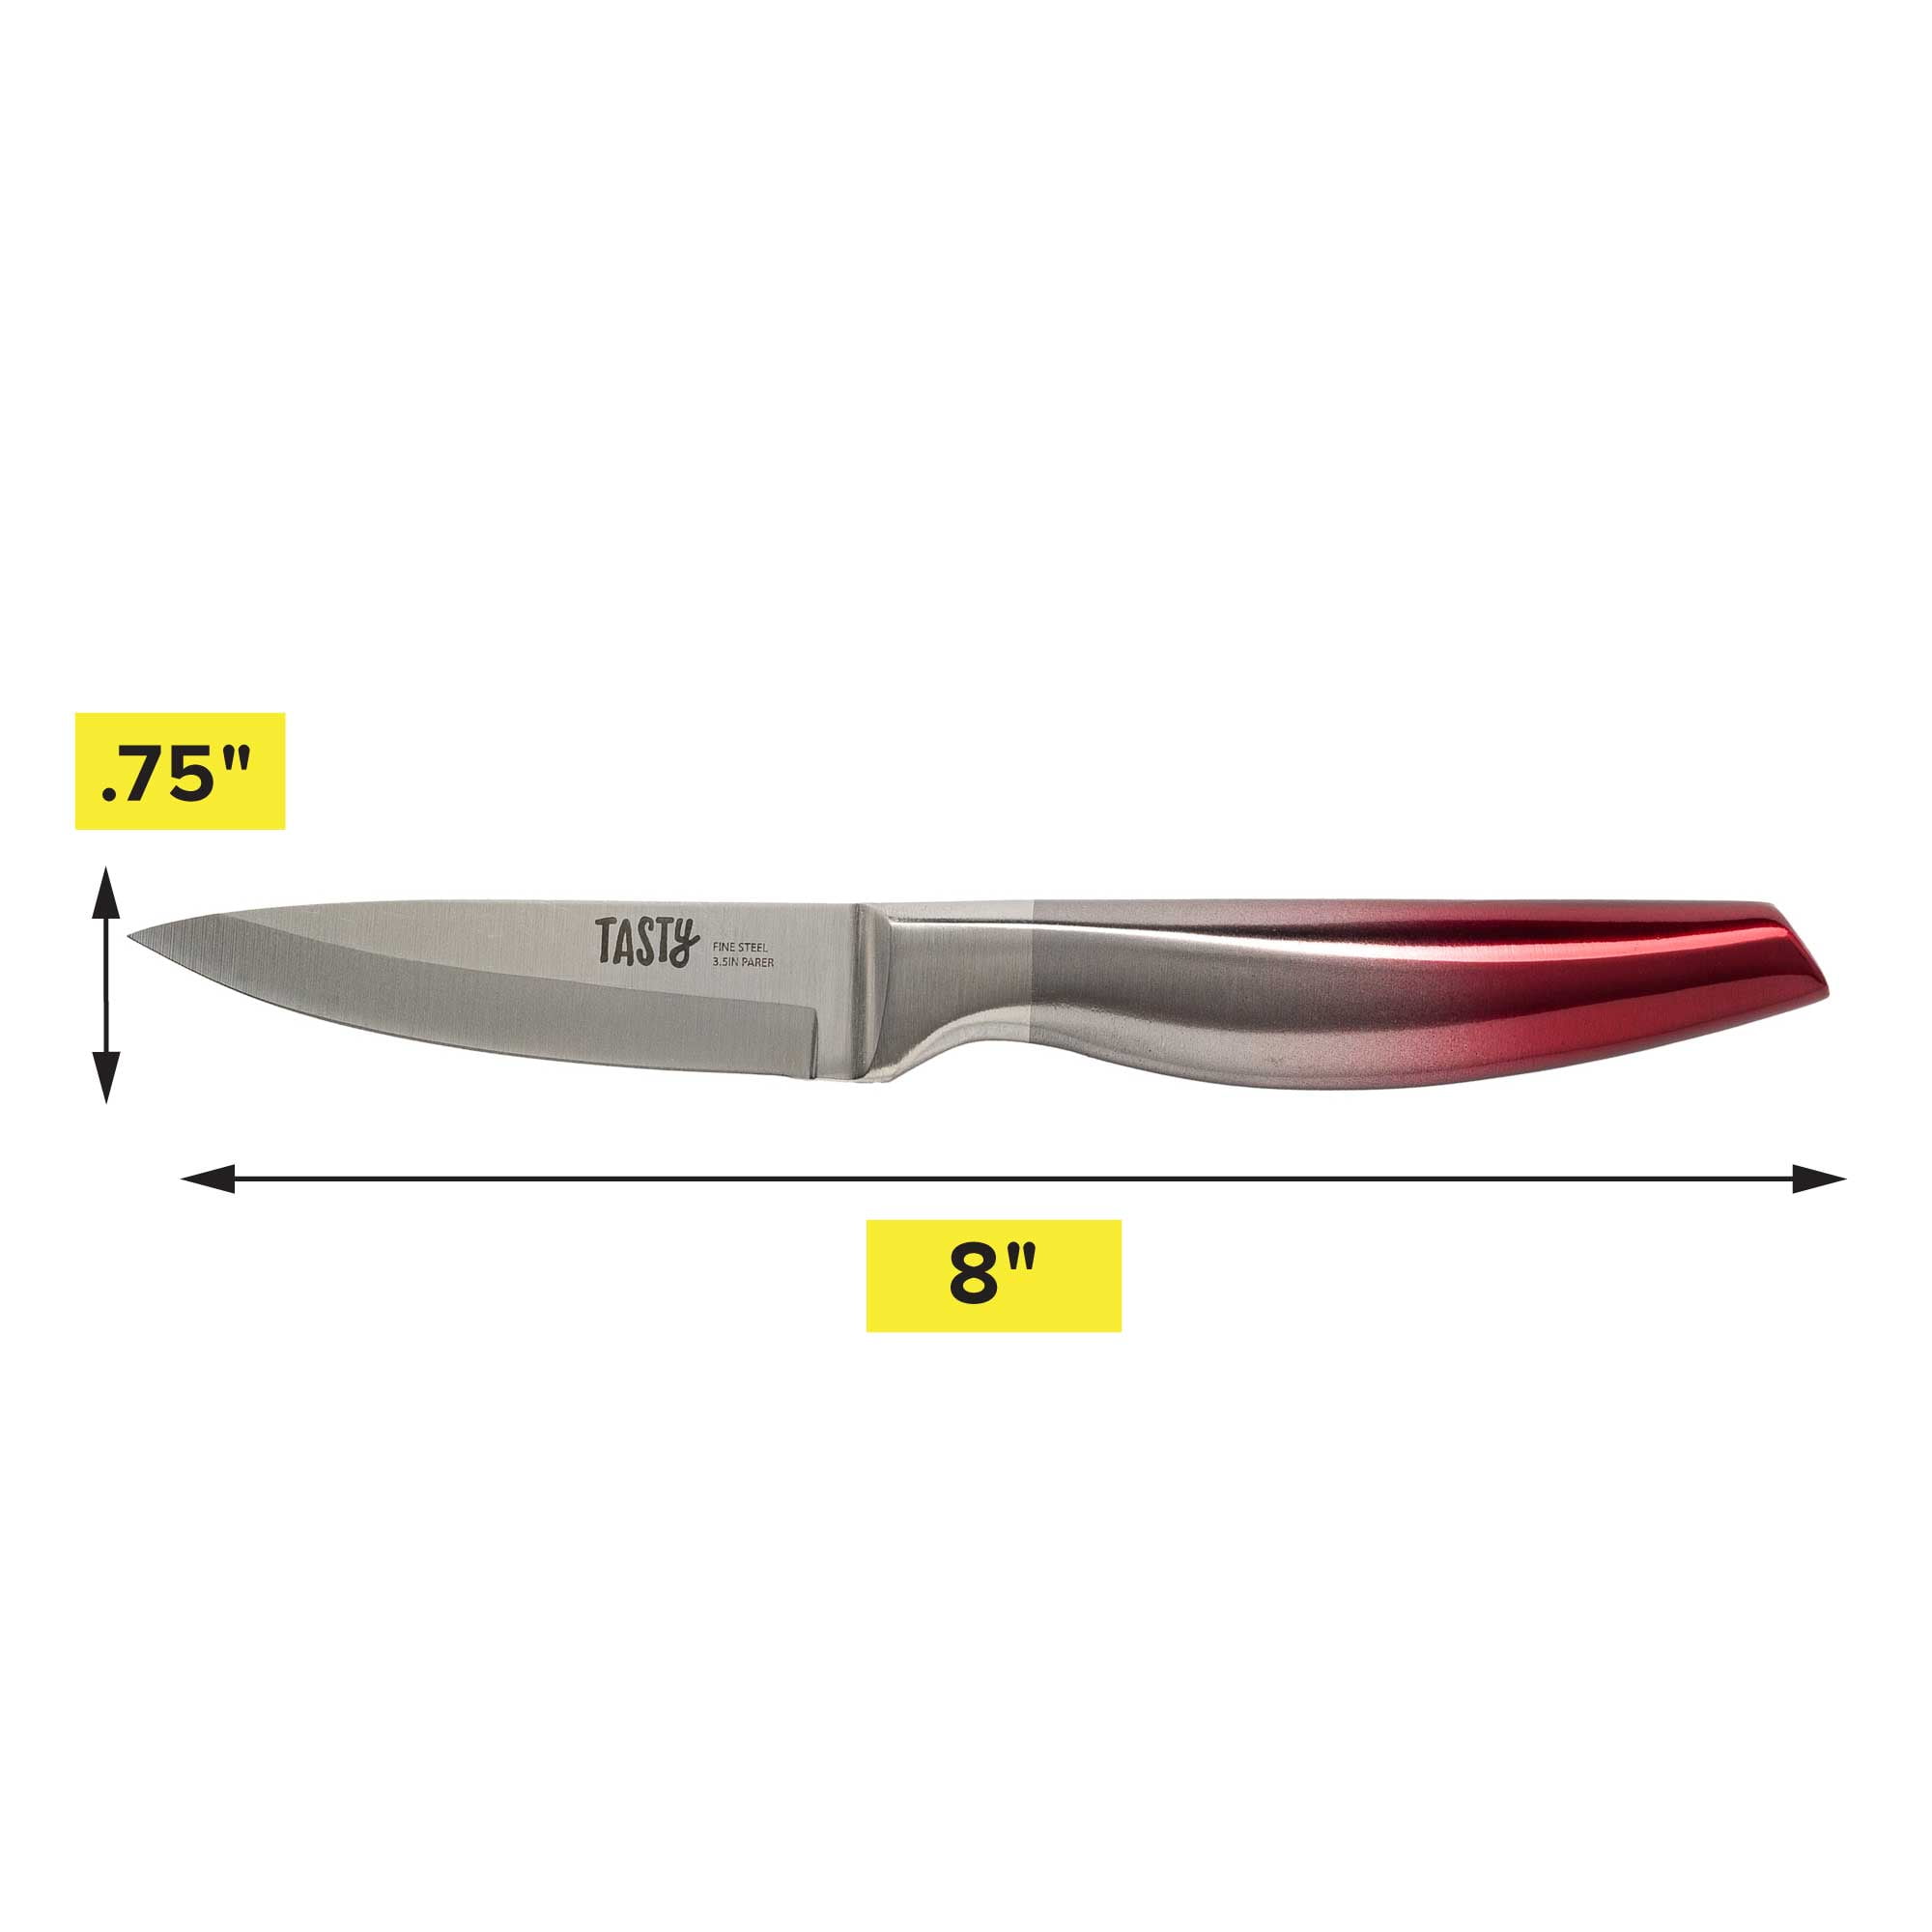 Tasty Stainless Steel Chef Knife Cutlery Set with Shears, Red, 4